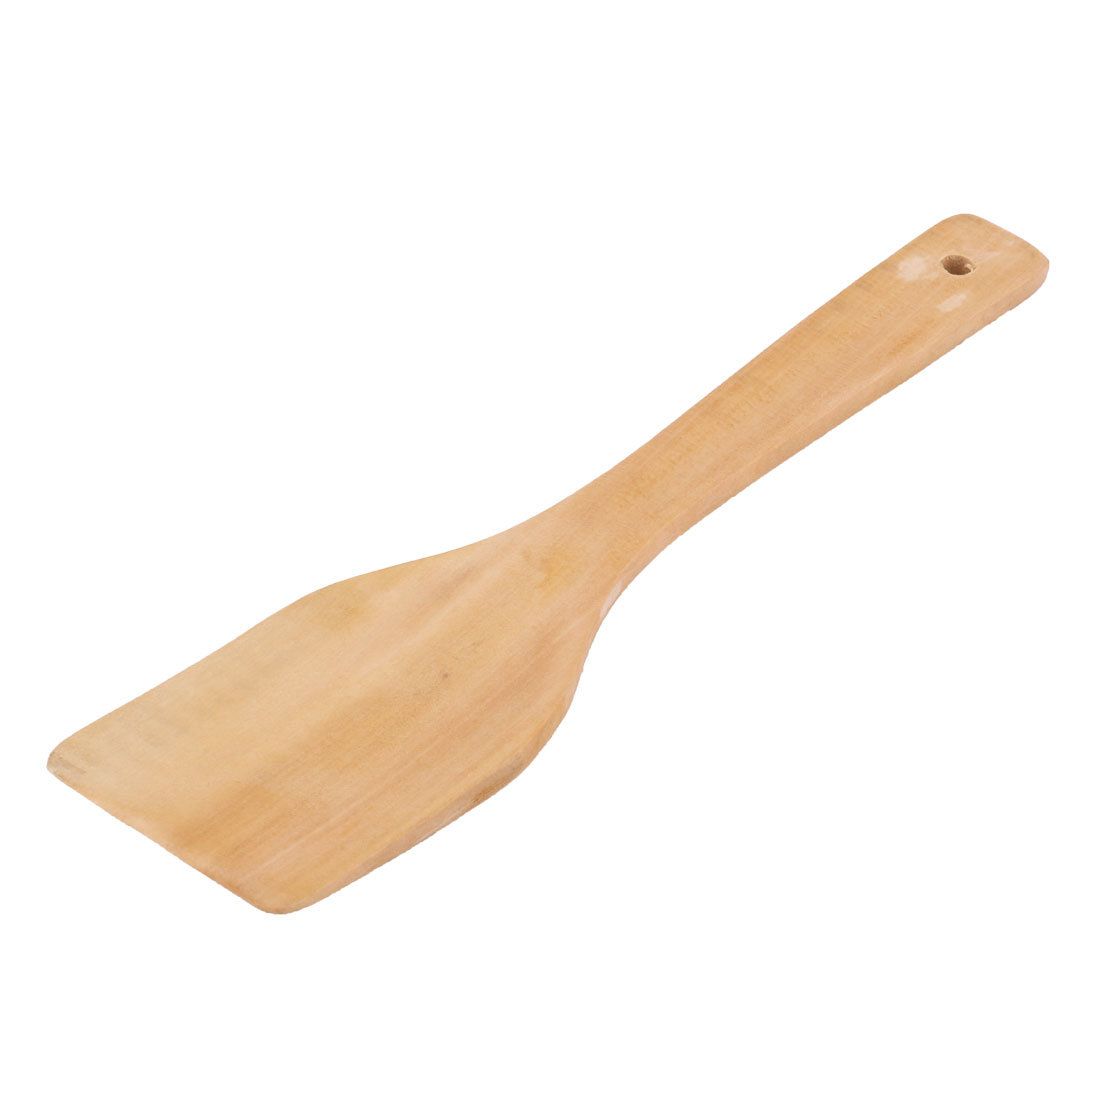 Wooden Mixing Spoon, 16.5 Inch Giant Wood Spoon, Long Handled Wooden Spoon